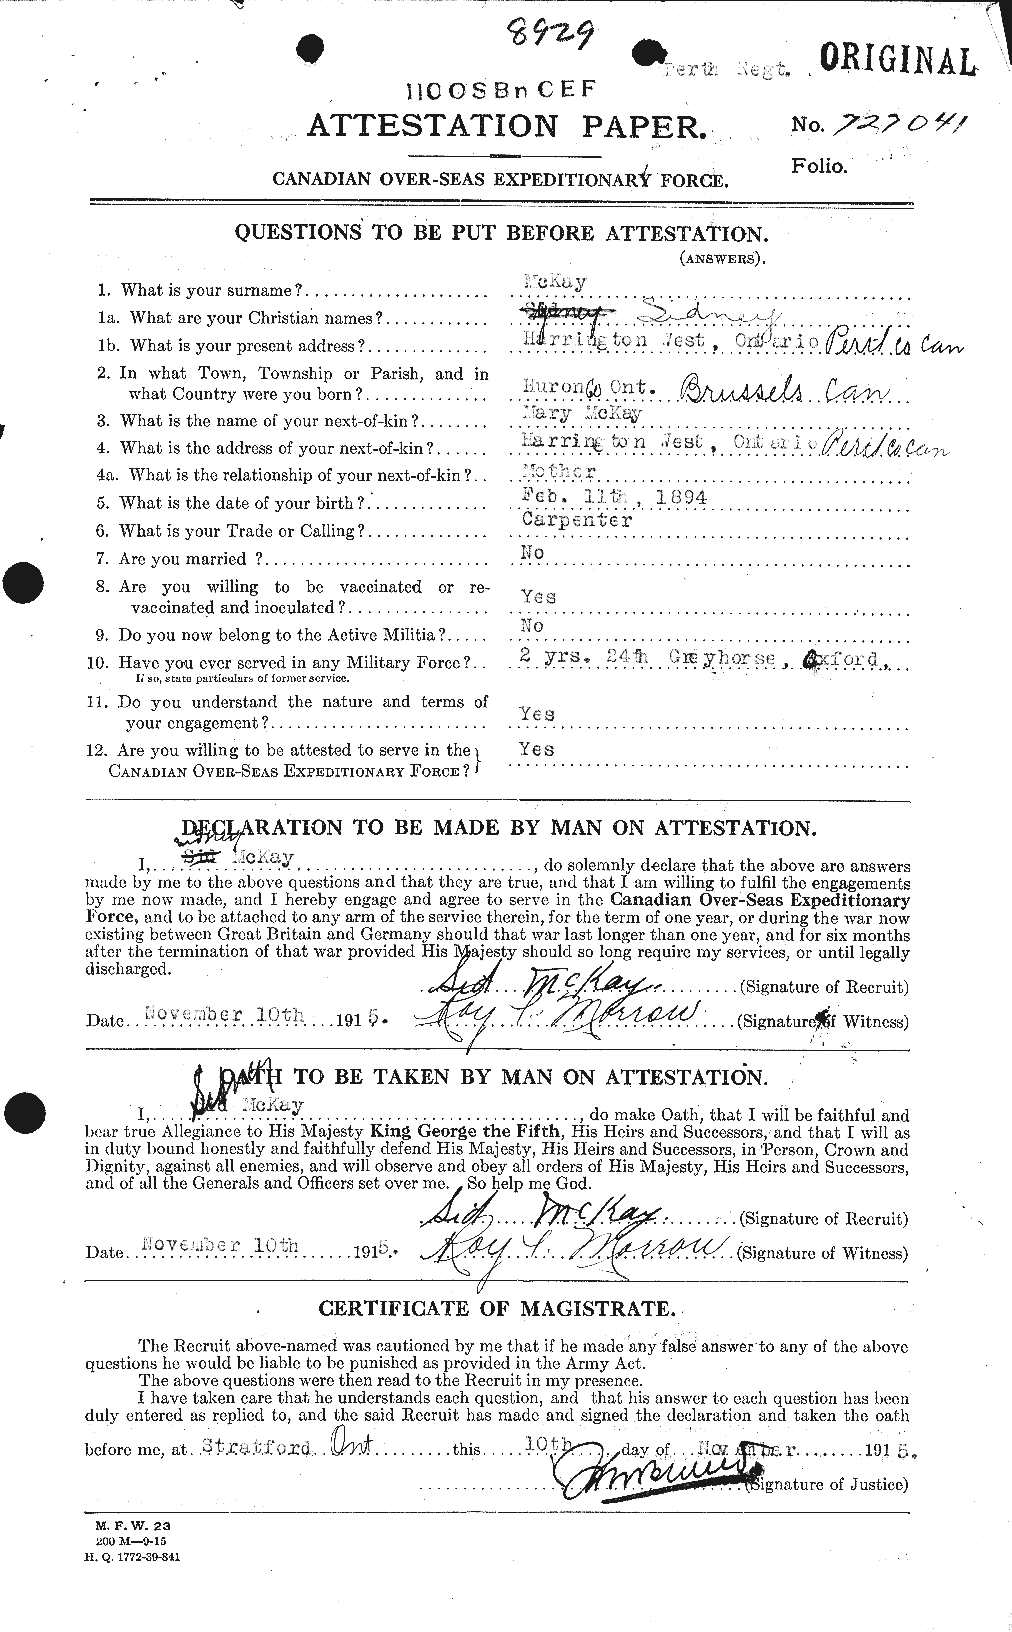 Personnel Records of the First World War - CEF 530136a